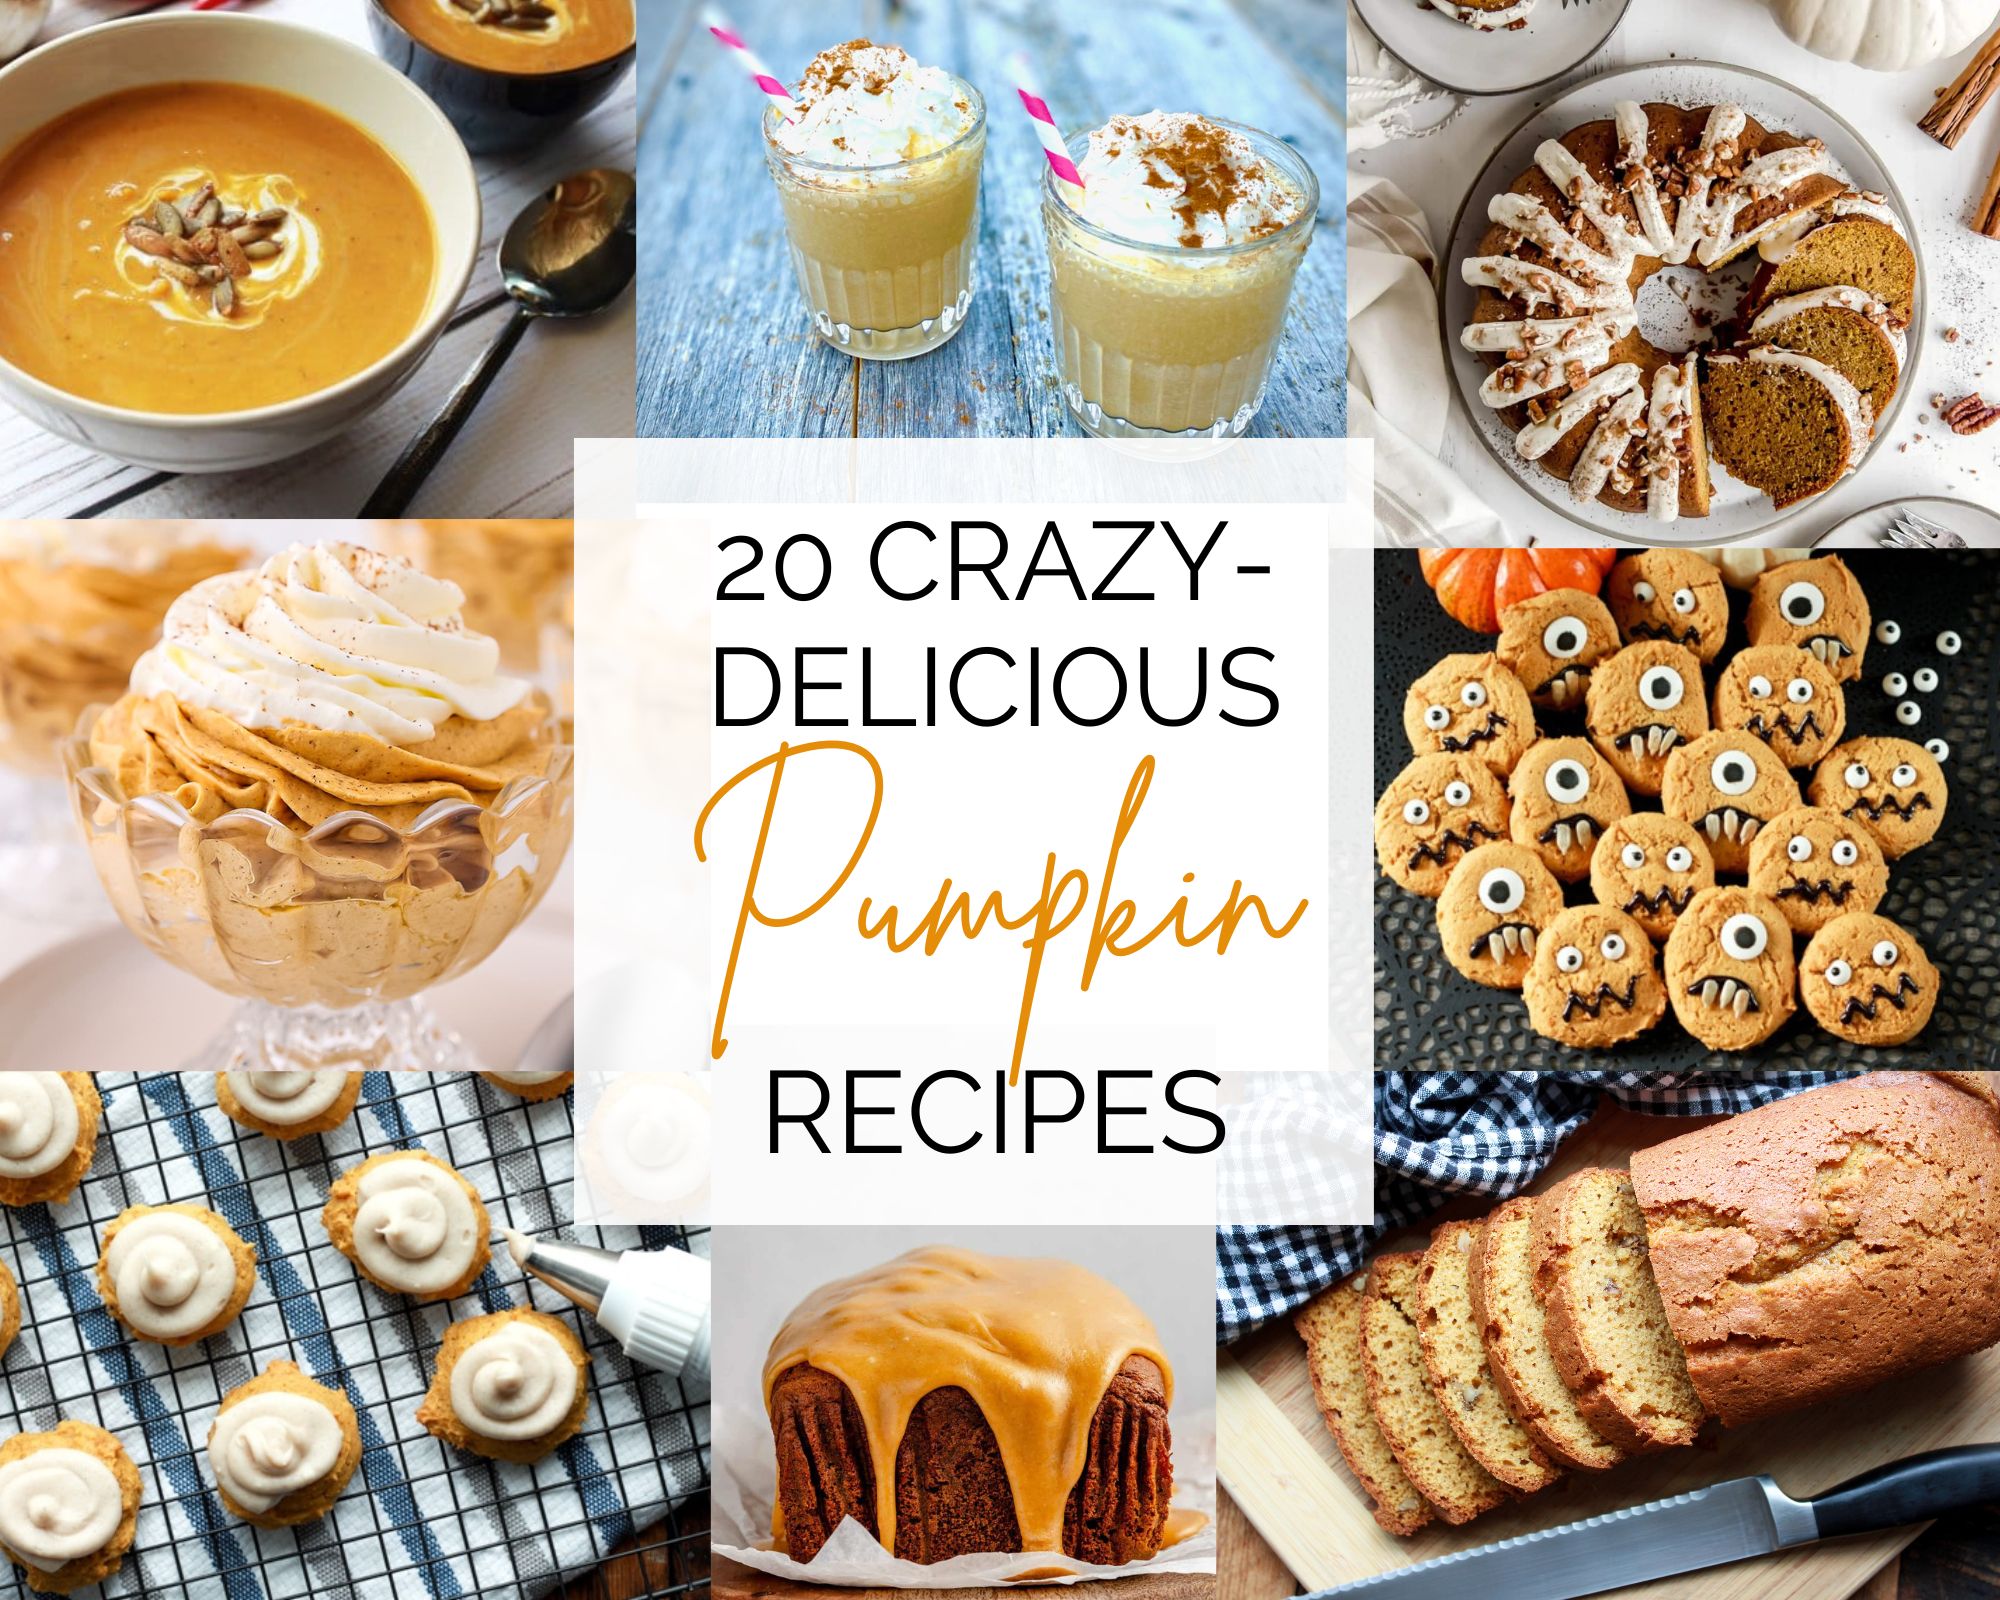 A picture collage of pumpkin recipes for a roundup of 20 Delicious Pumpkin Recipes.